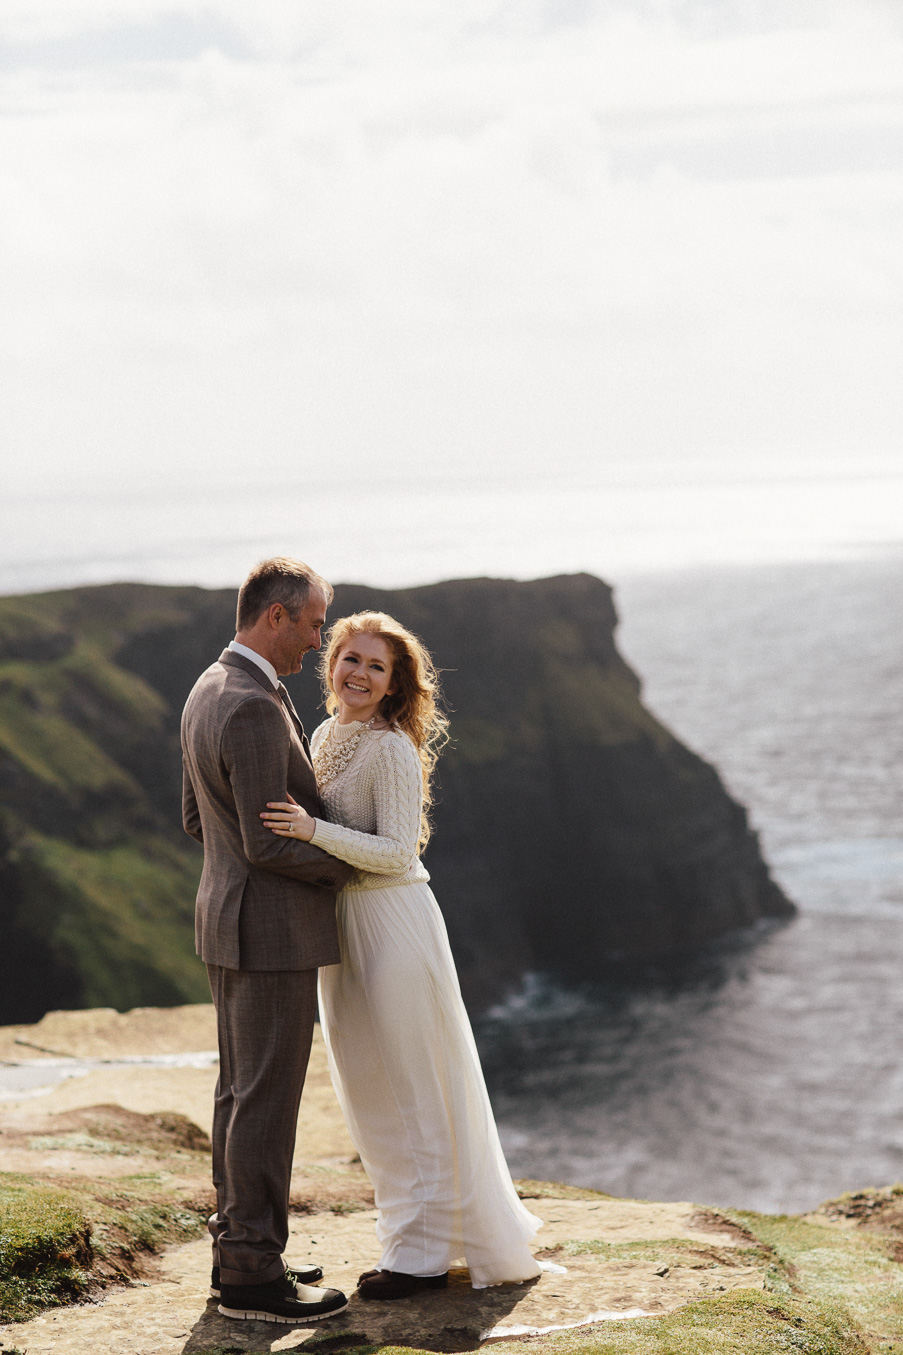 Elopement at the cliffs of moher